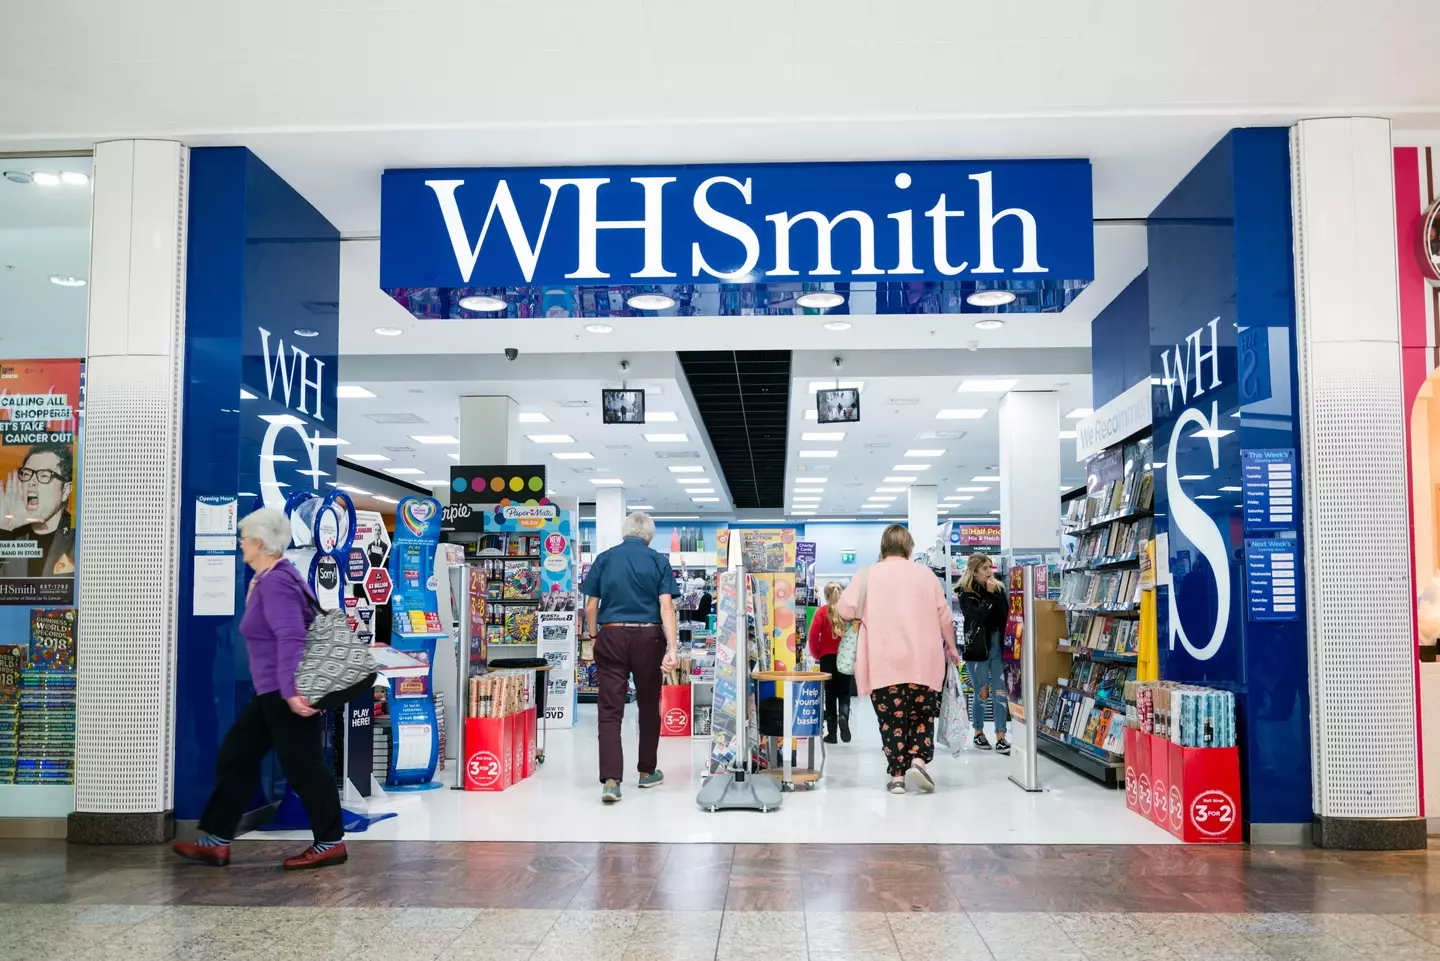 The Toys R Us grand return is in partnership with WHSmith.